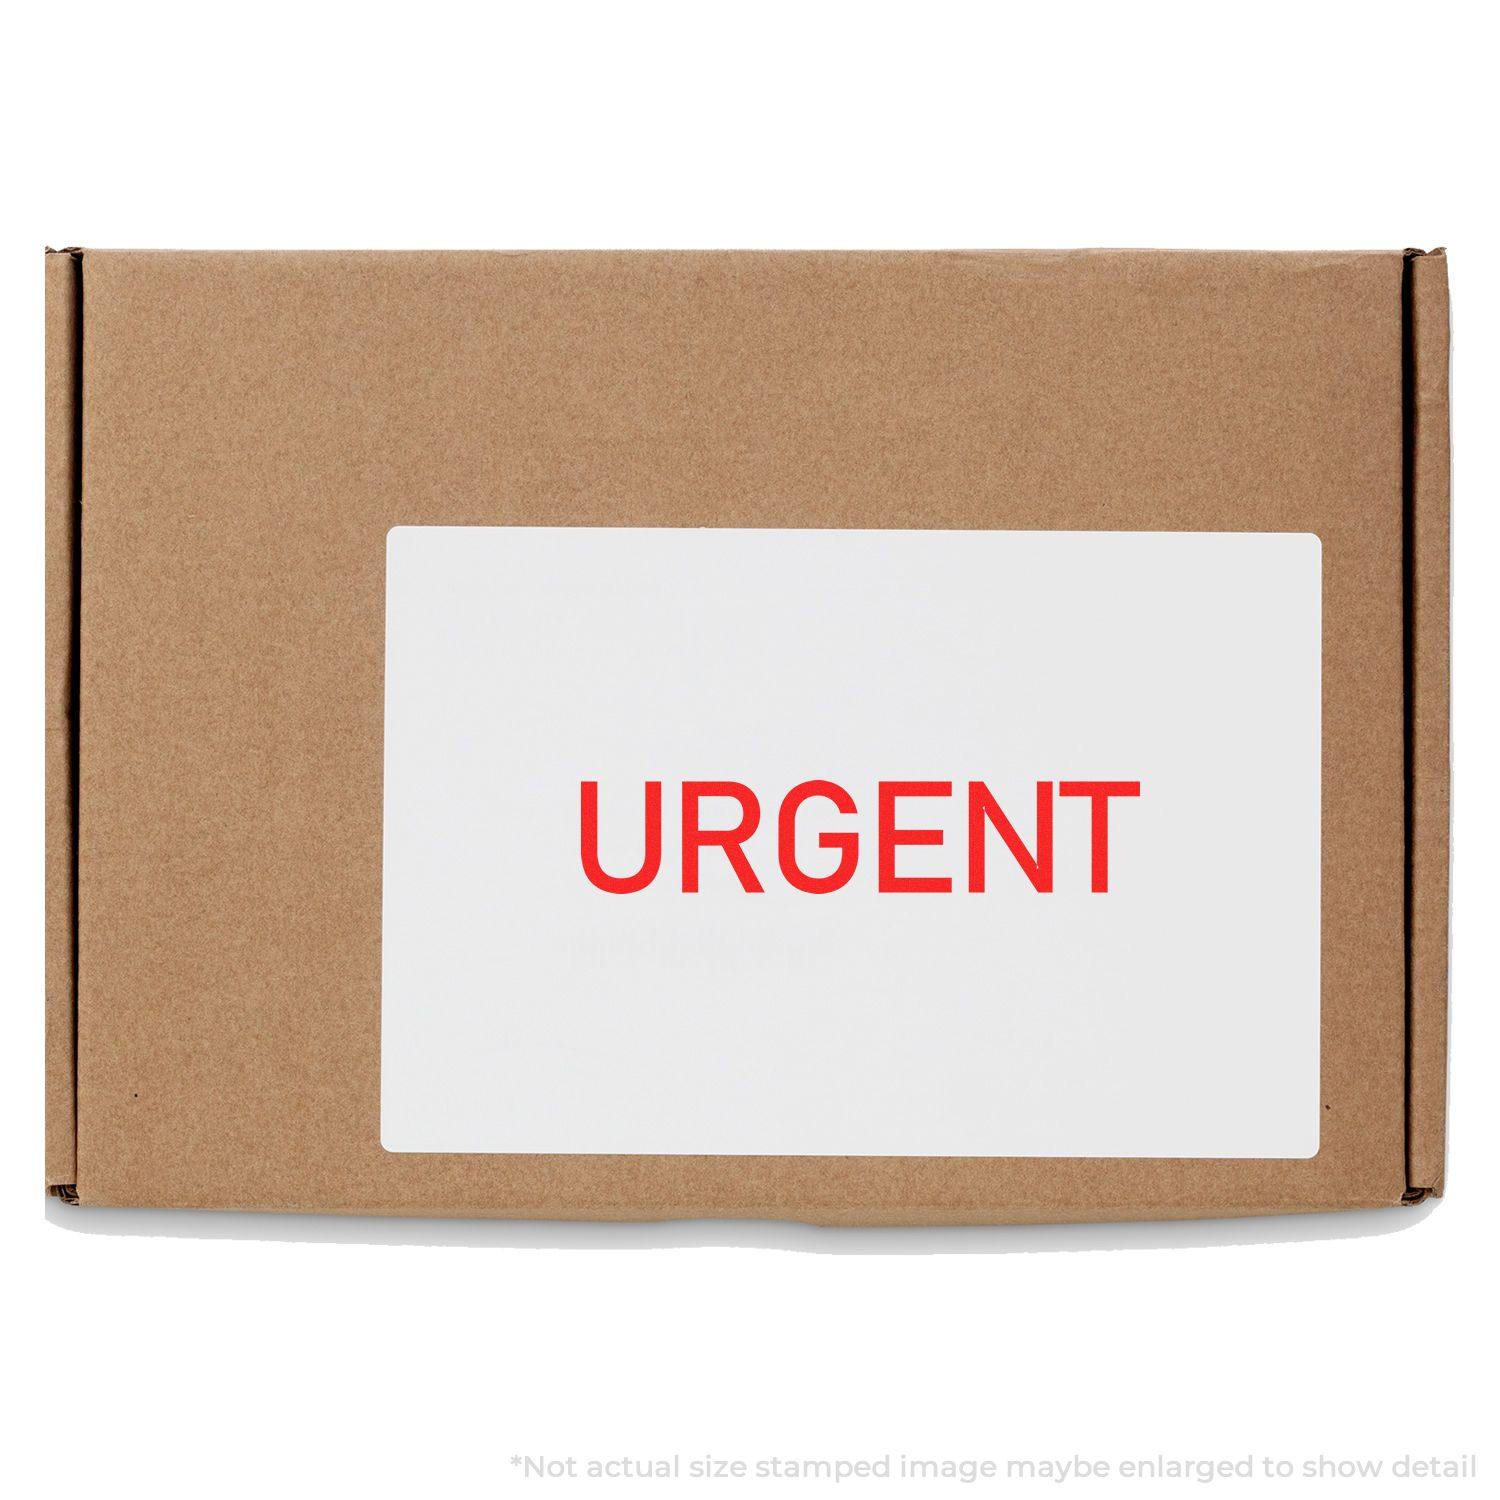 A stock office rubber stamp with a stamped image showing how the text "URGENT" in a large narrow font is displayed after stamping.